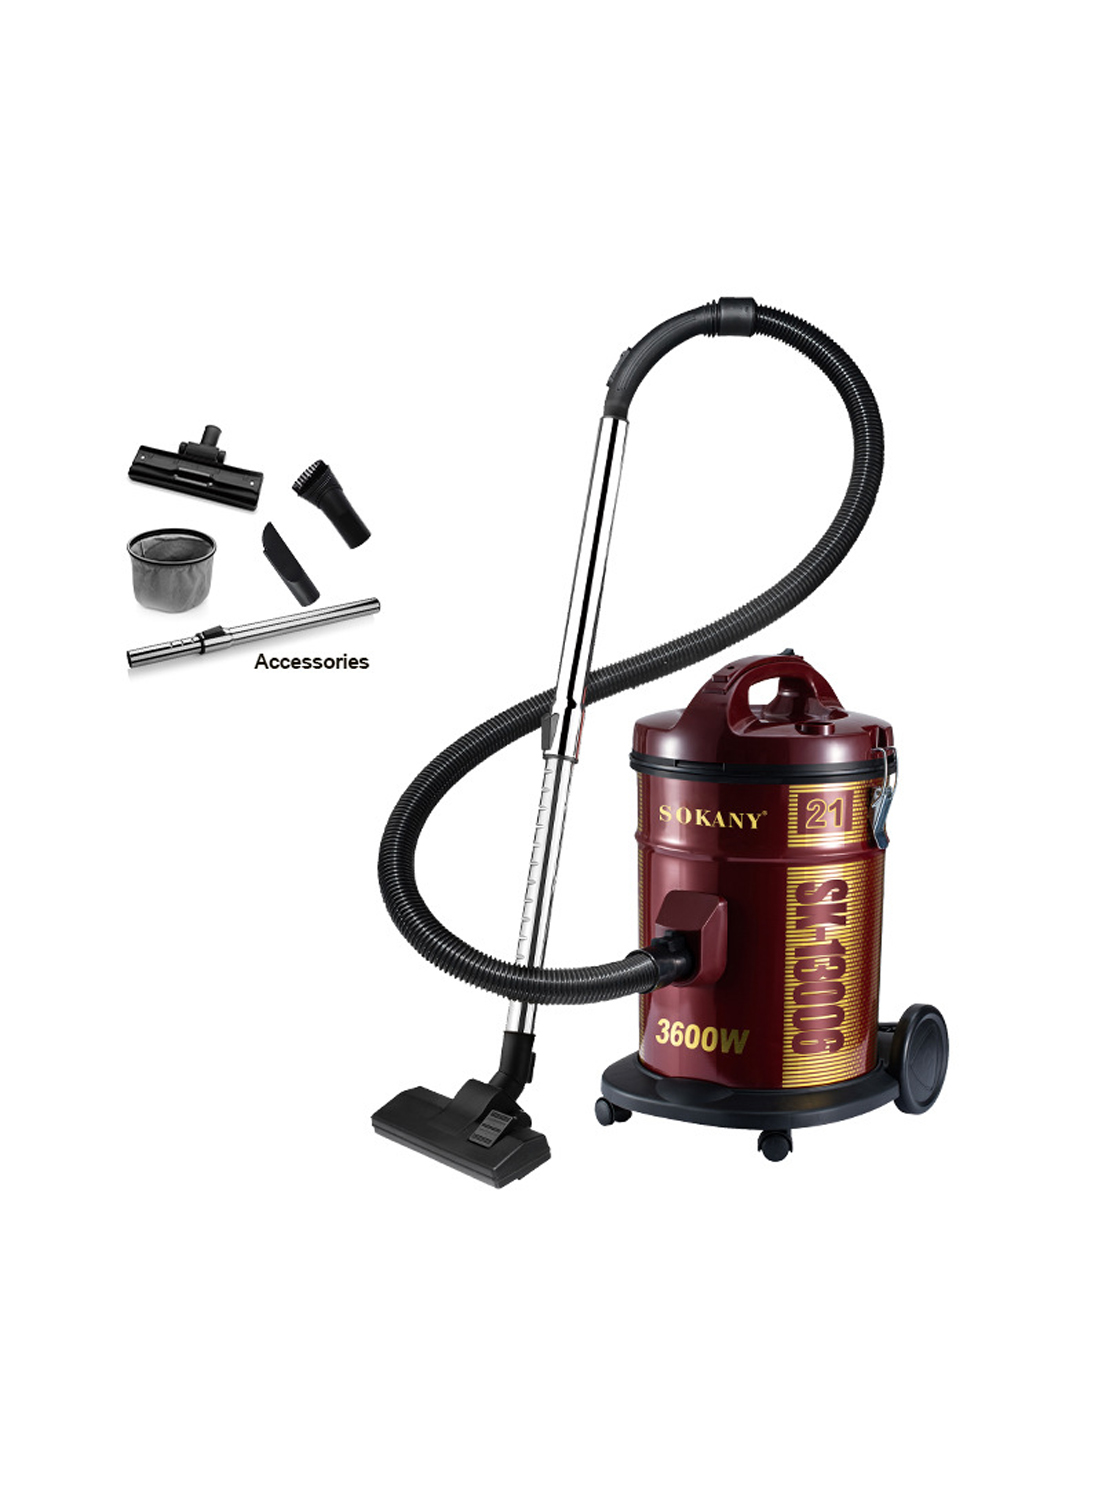 Canister Vacuums 3600W/21L SK-13006